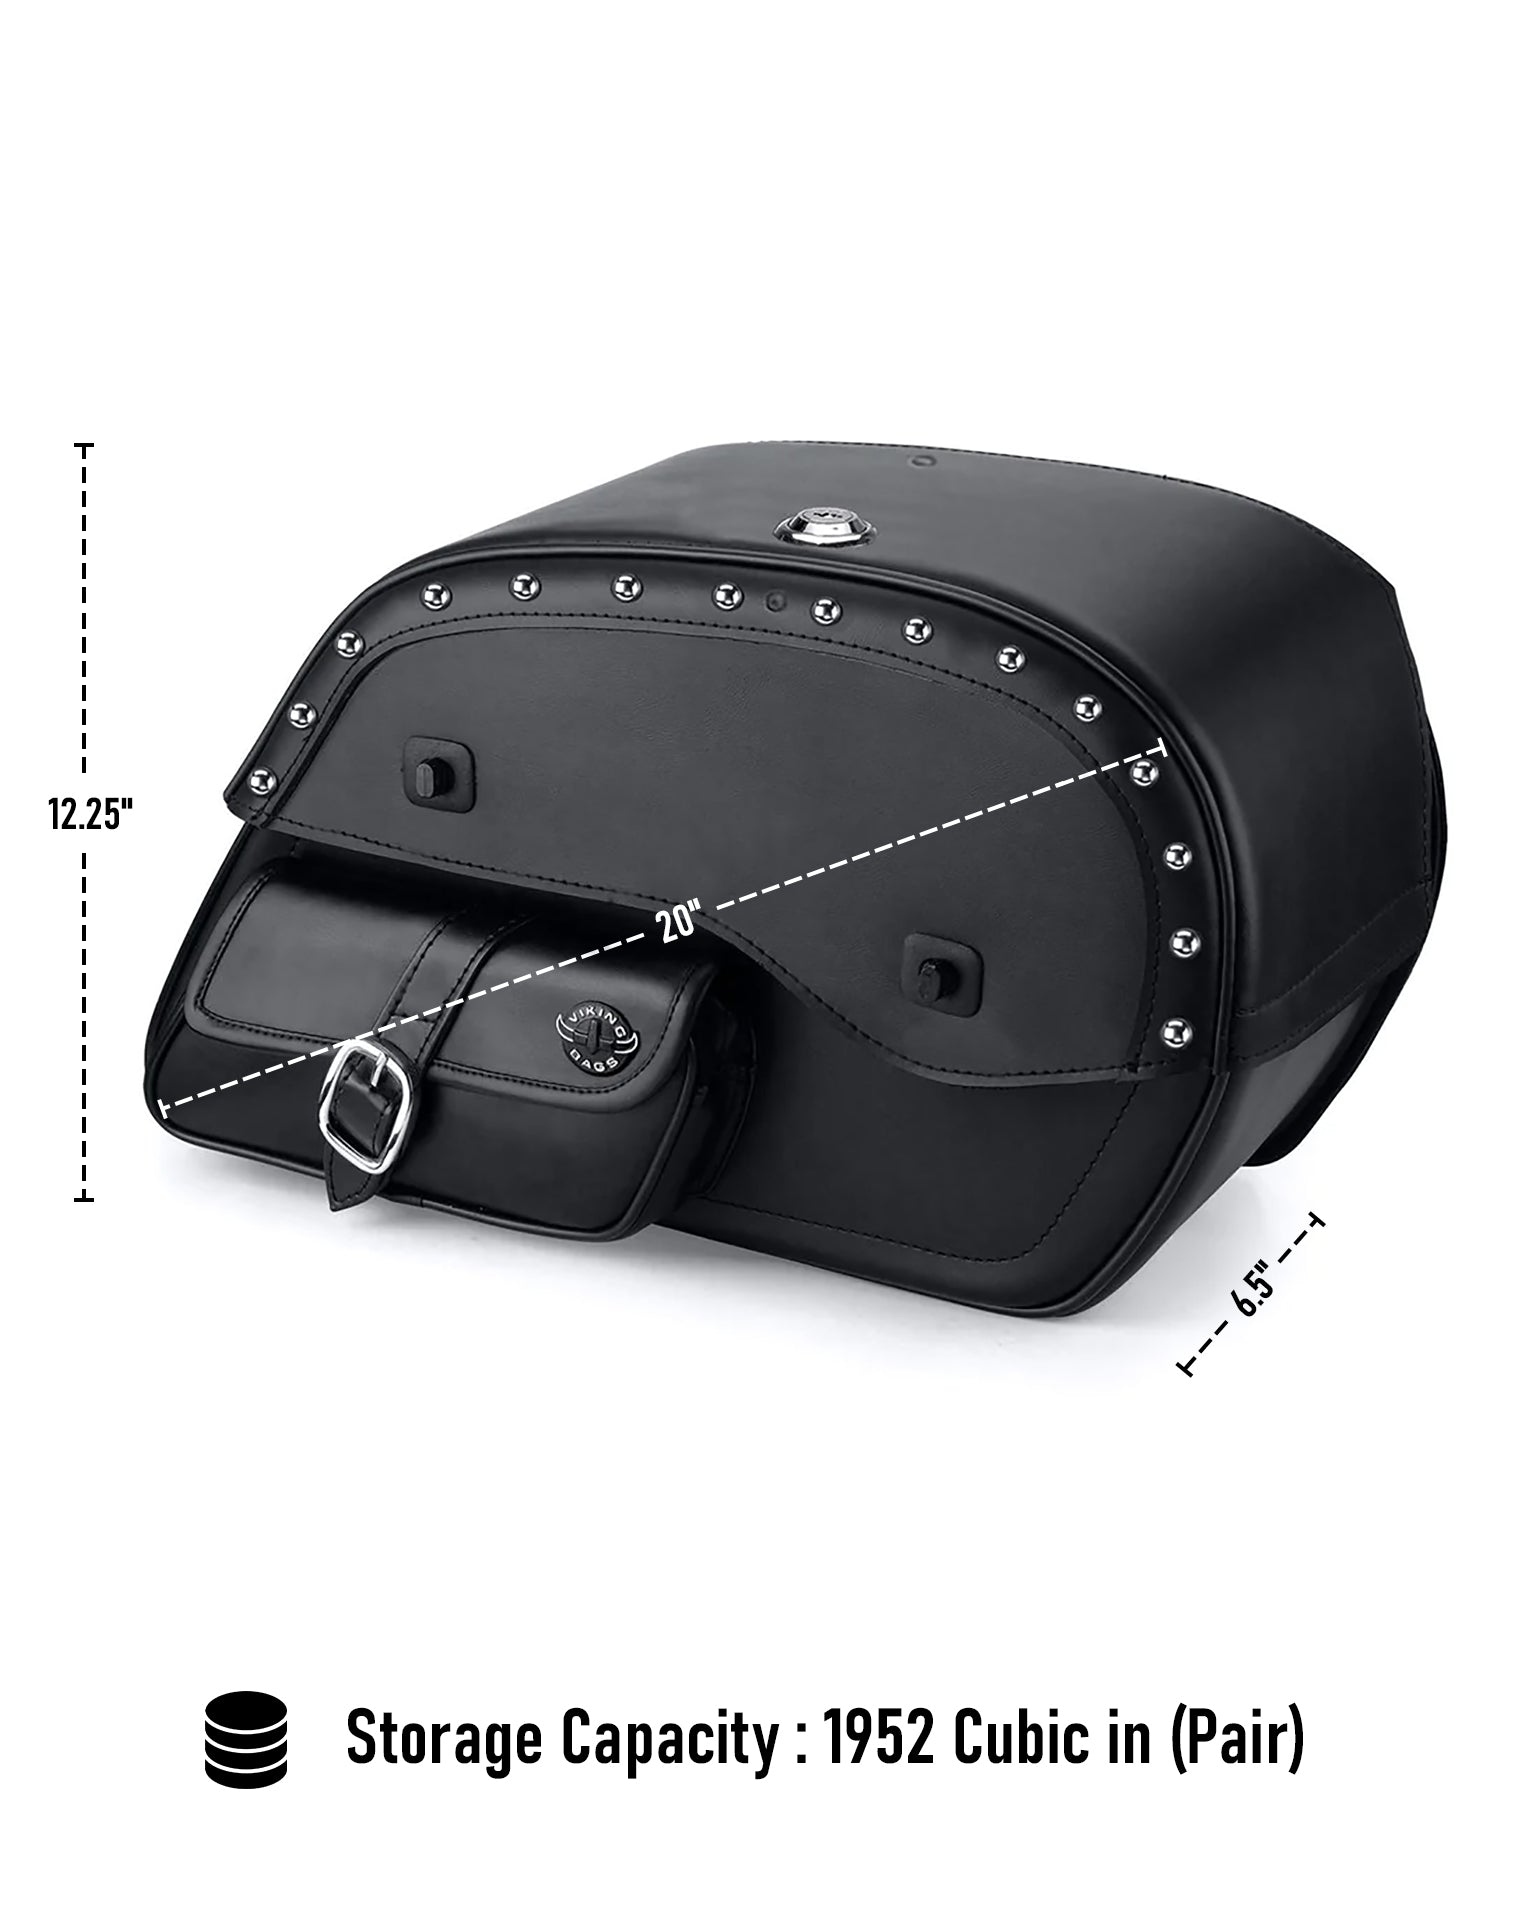 Viking Side Pocket Large Studded Kawasaki Vulcan 900 Classic Vn900 Leather Motorcycle Saddlebags Weather Resistant Bags Comes in Pair